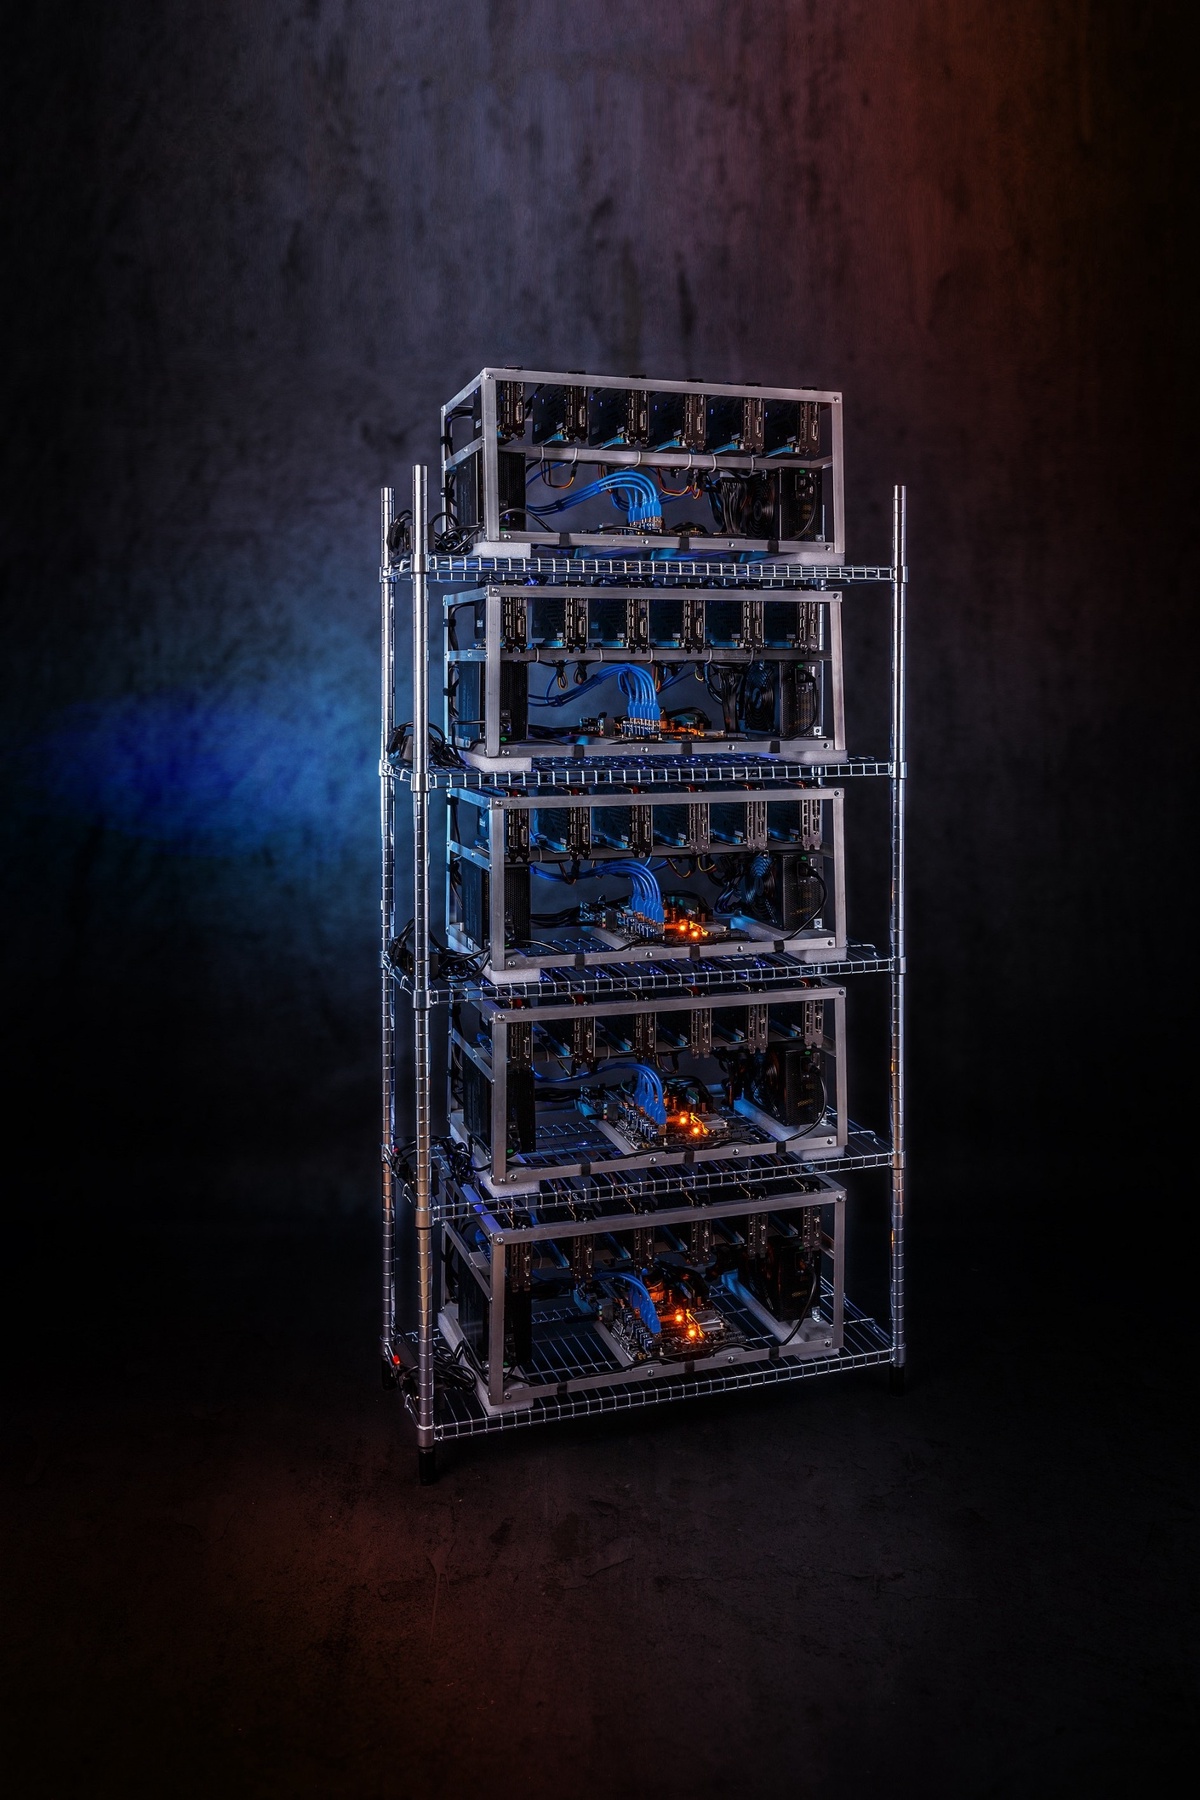 GD Supplies Starts Selling Bitcoin Mining Machines in India